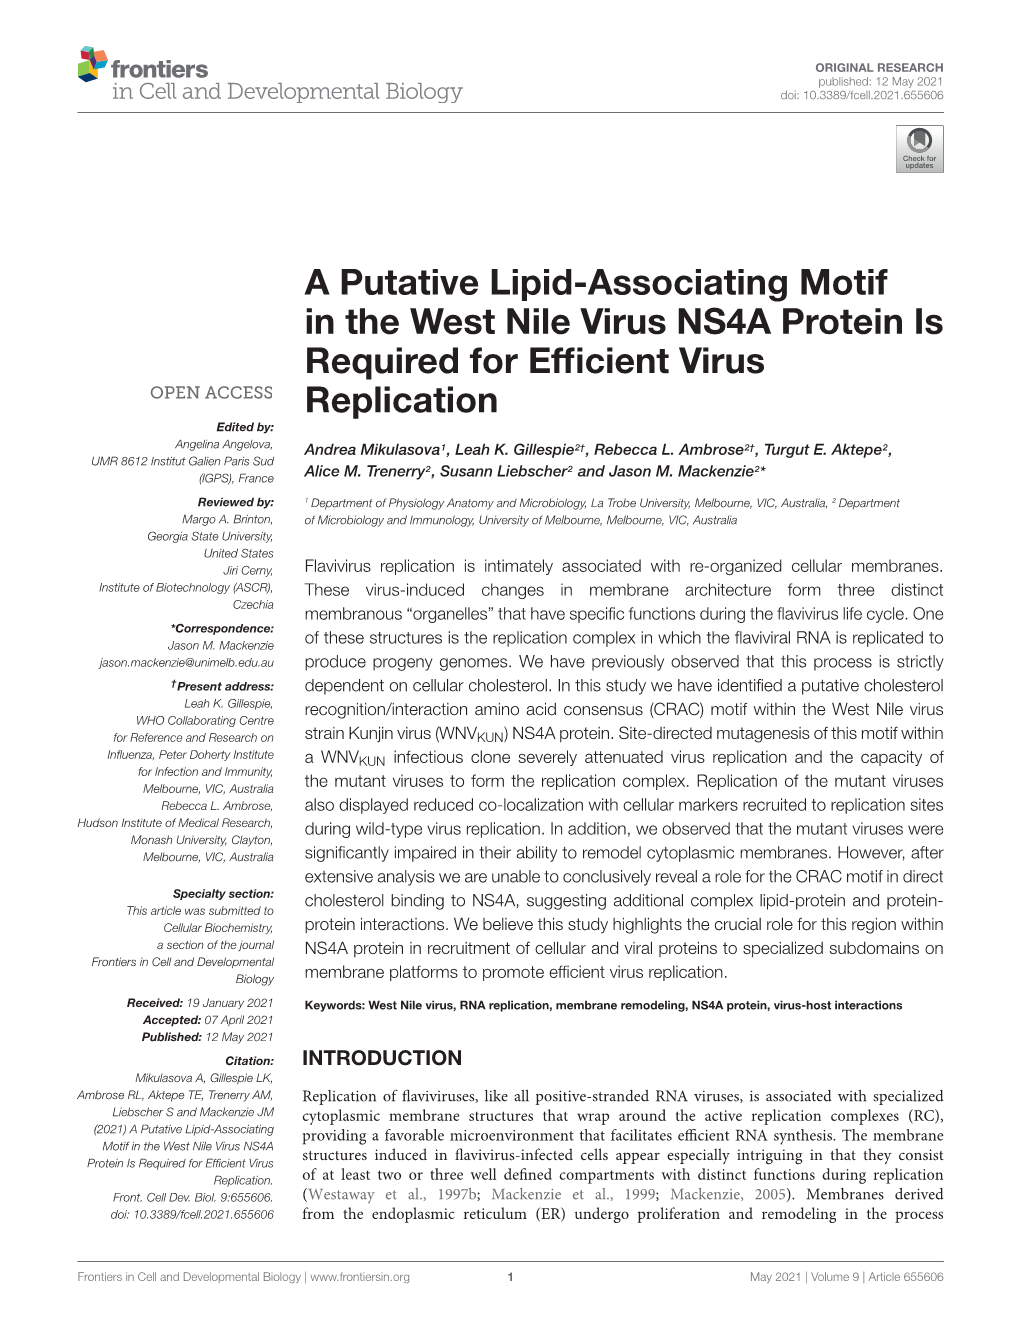 A Putative Lipid-Associating Motif in the West Nile Virus NS4A Protein Is